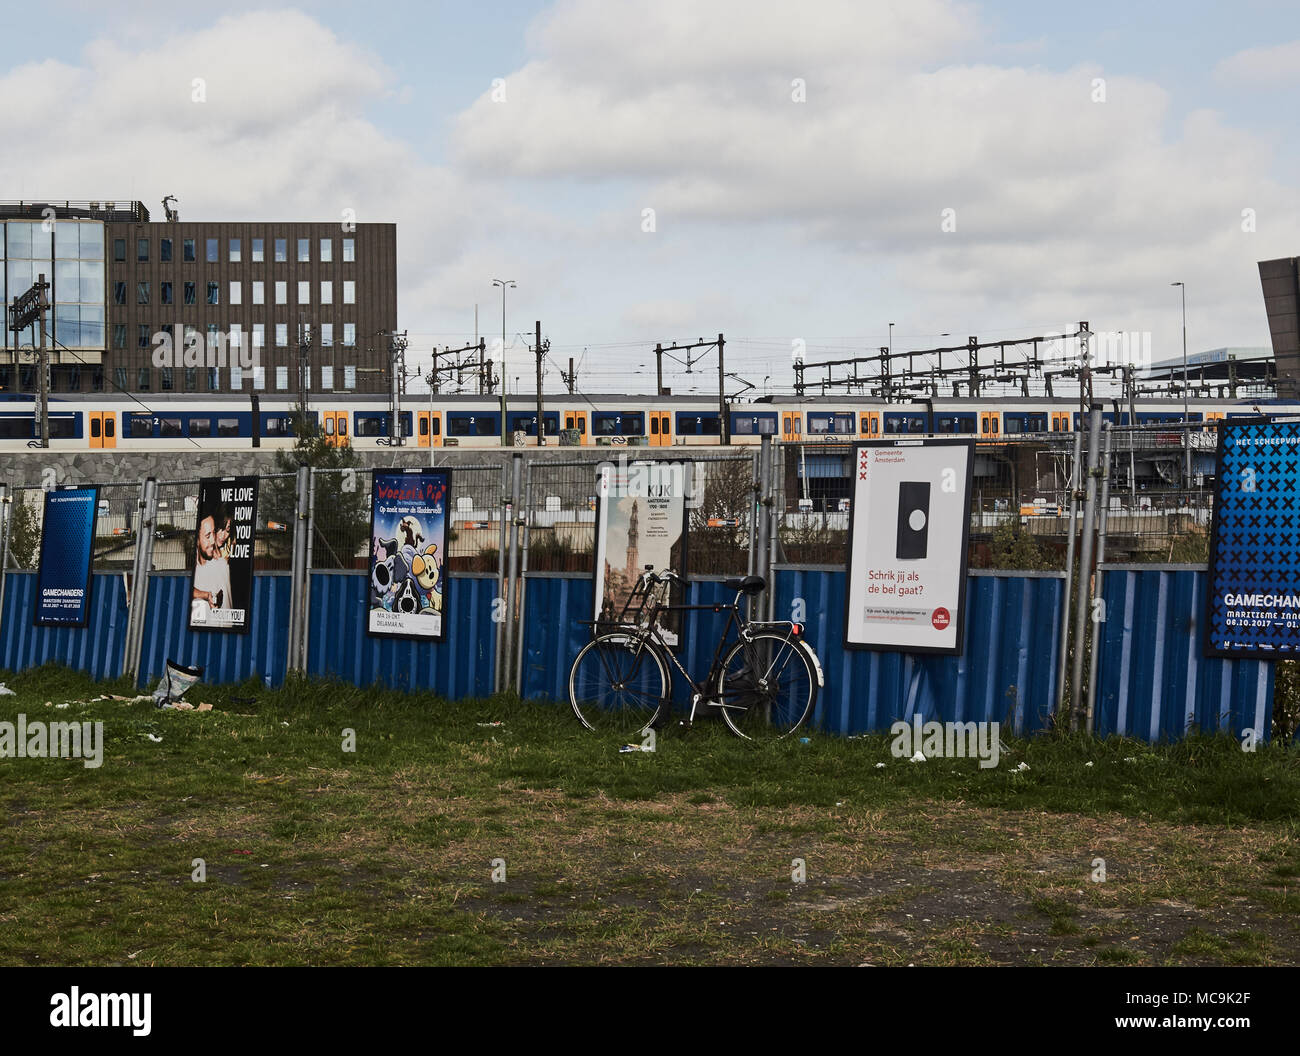 Advertising boards and bicycle in urban landscape, Amsterdam, Netherlands Stock Photo